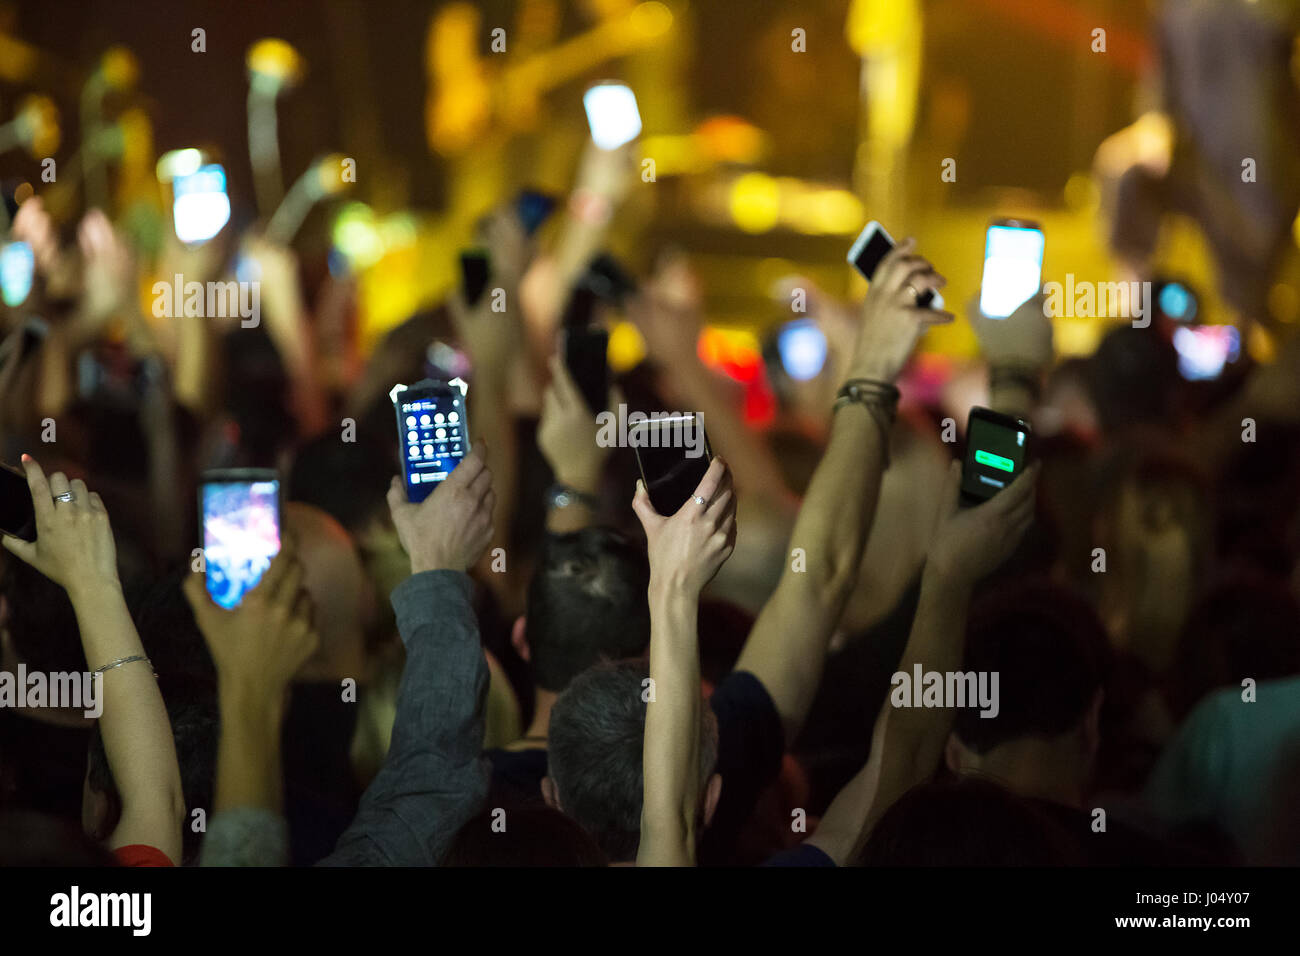 Crowd at concert and blurred stage lights . Close up of photographing with smartphone during a concert . Stock Photo